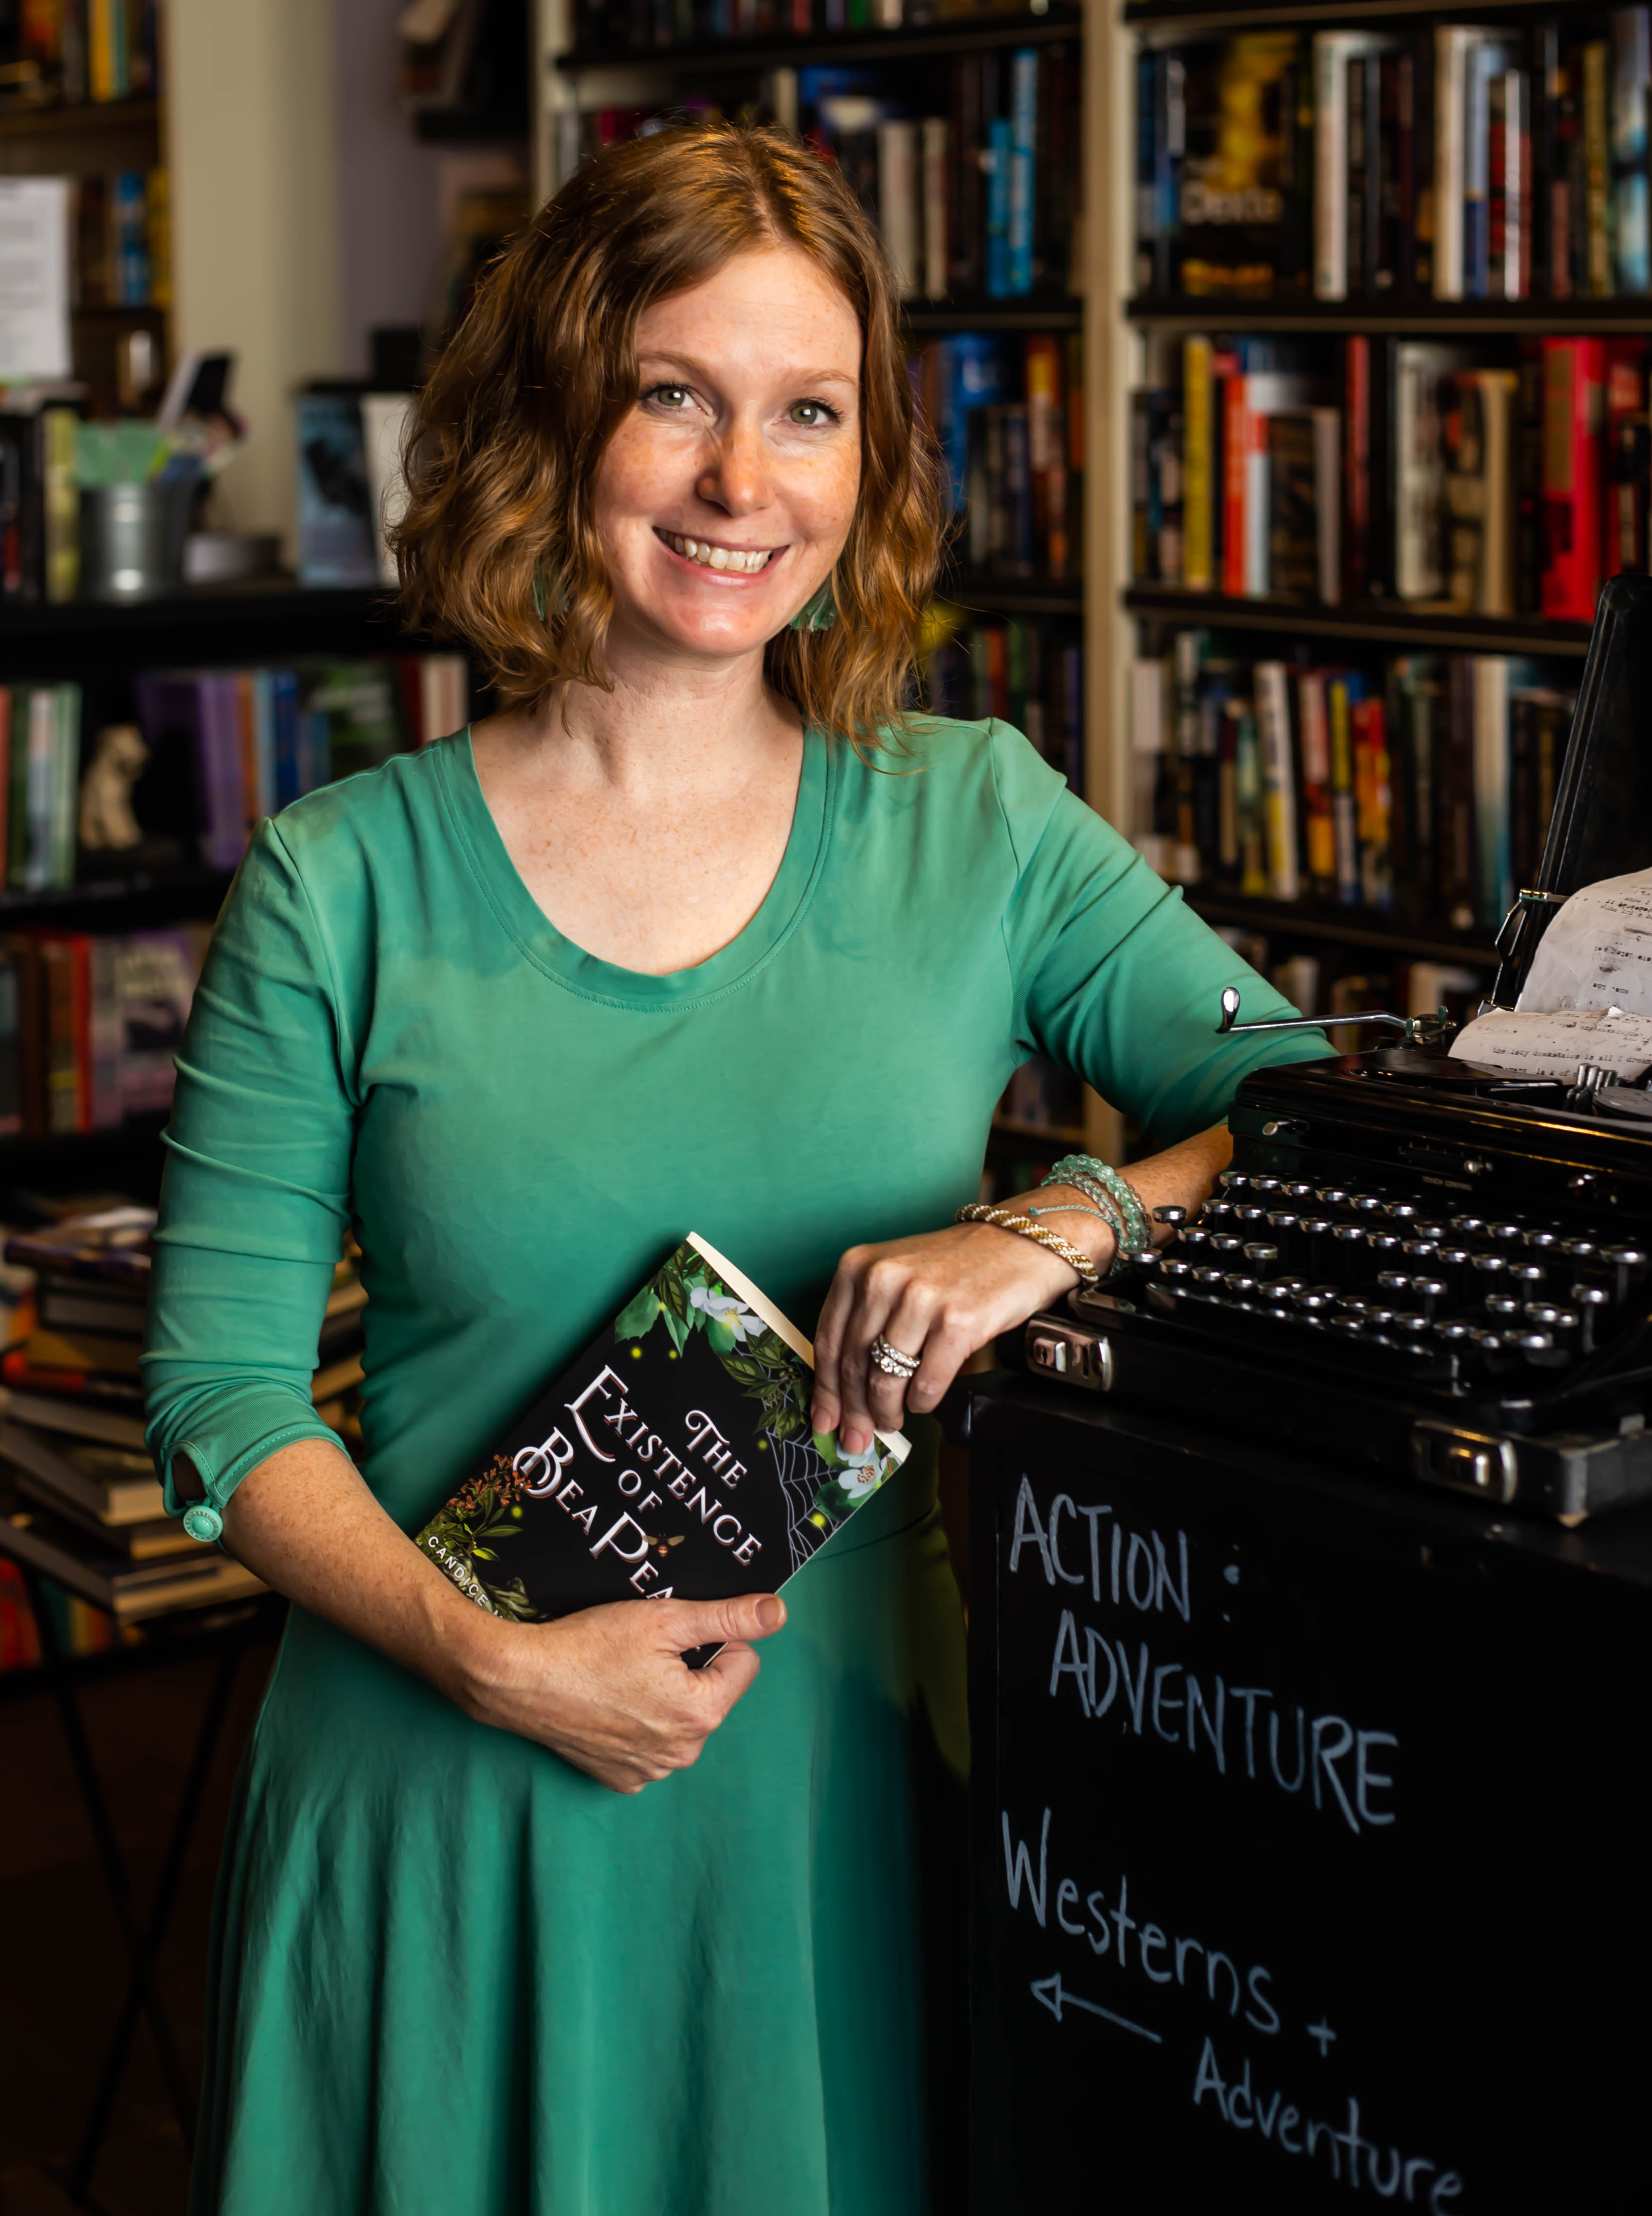 Author Candice Marley Conner stands in a bookstore holding her YA mystery The Existence of Bea Pearl.